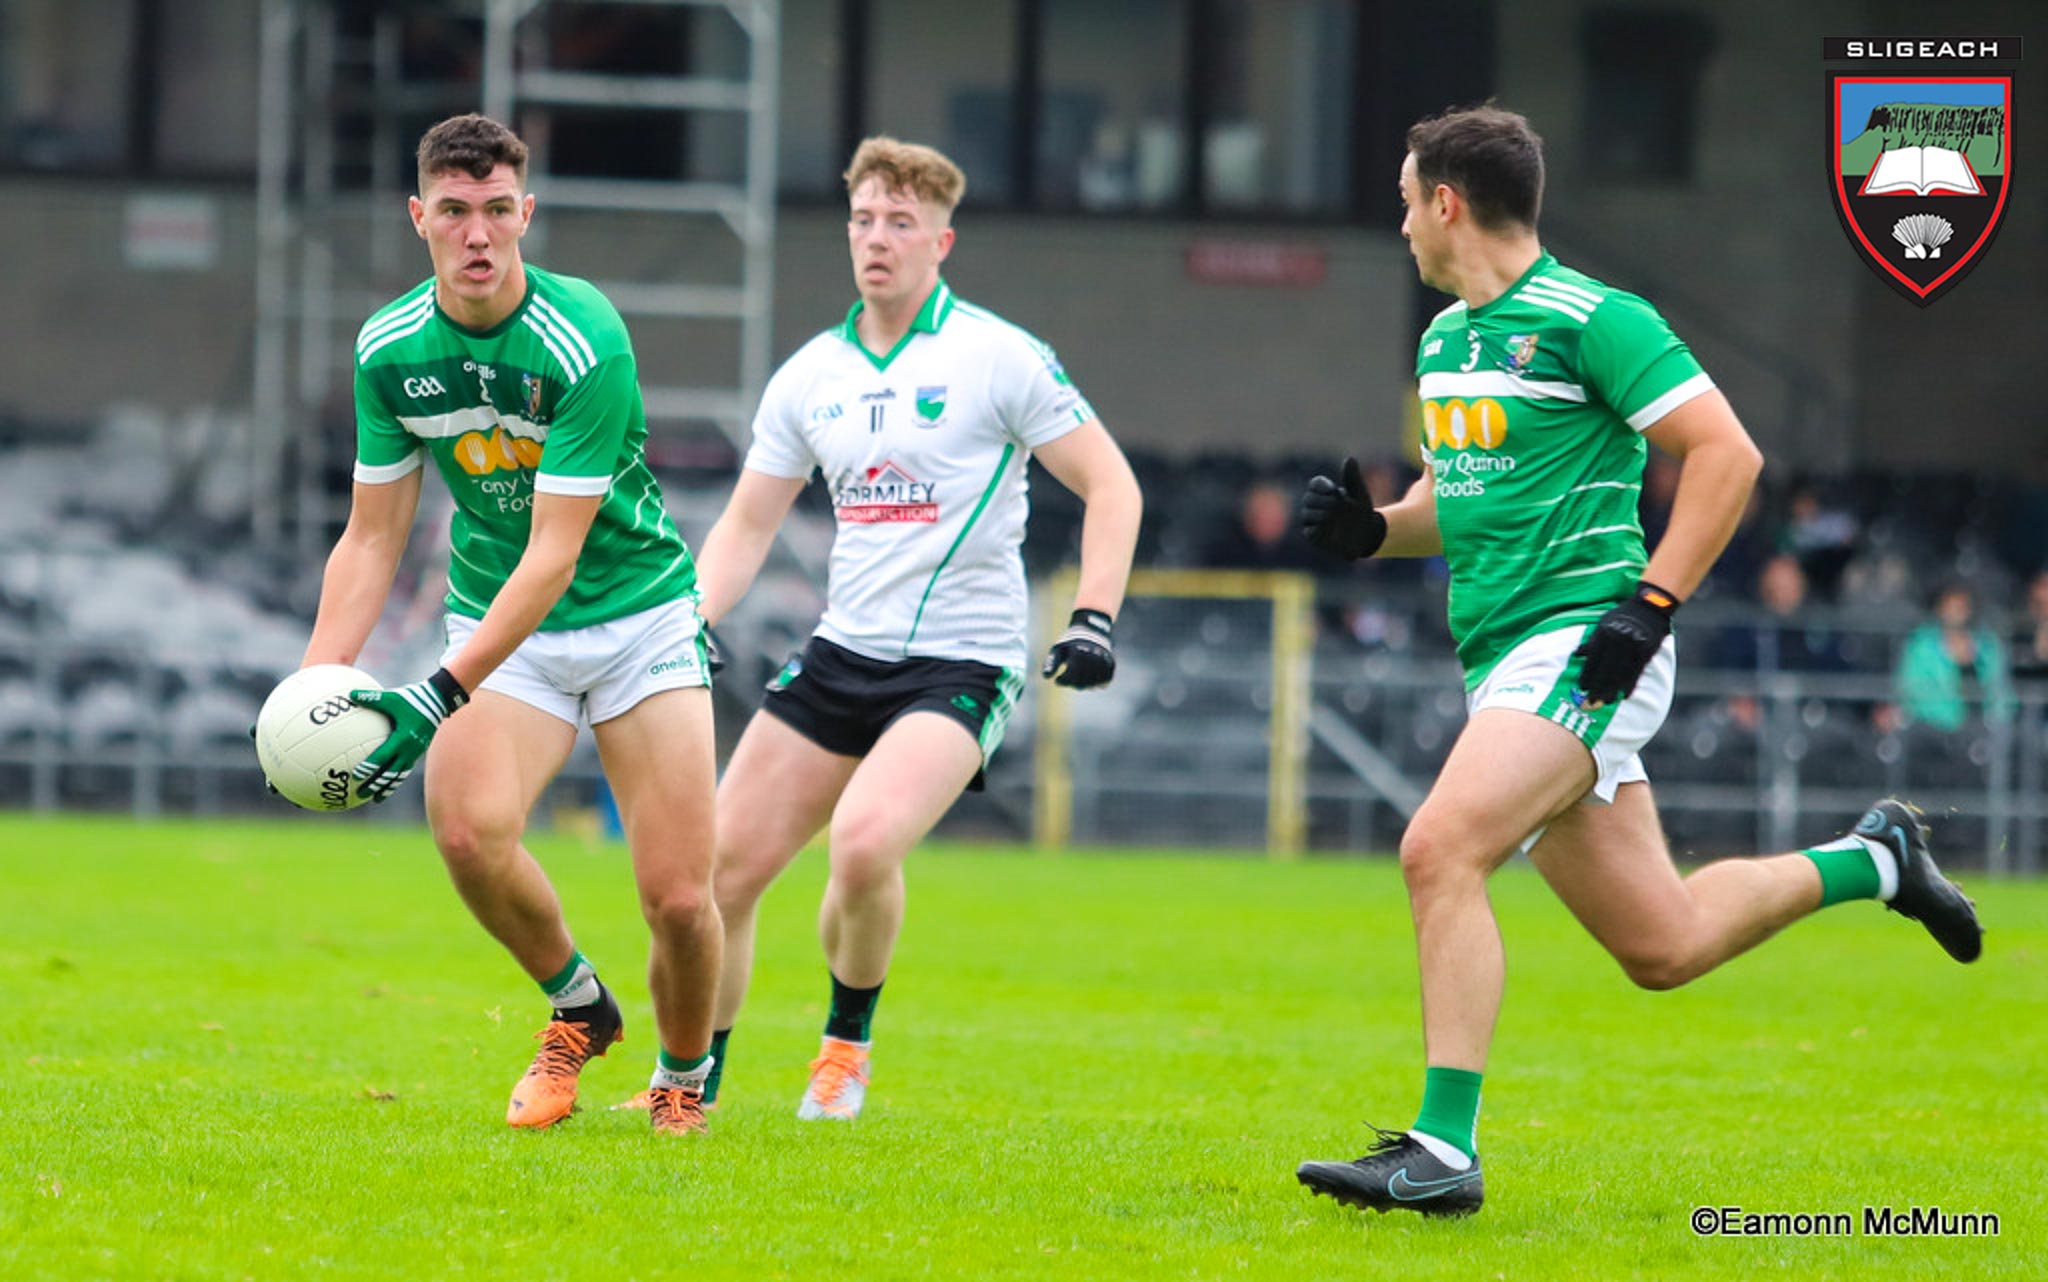 St Molaise Gaels pull away to reach Intermediate championship final